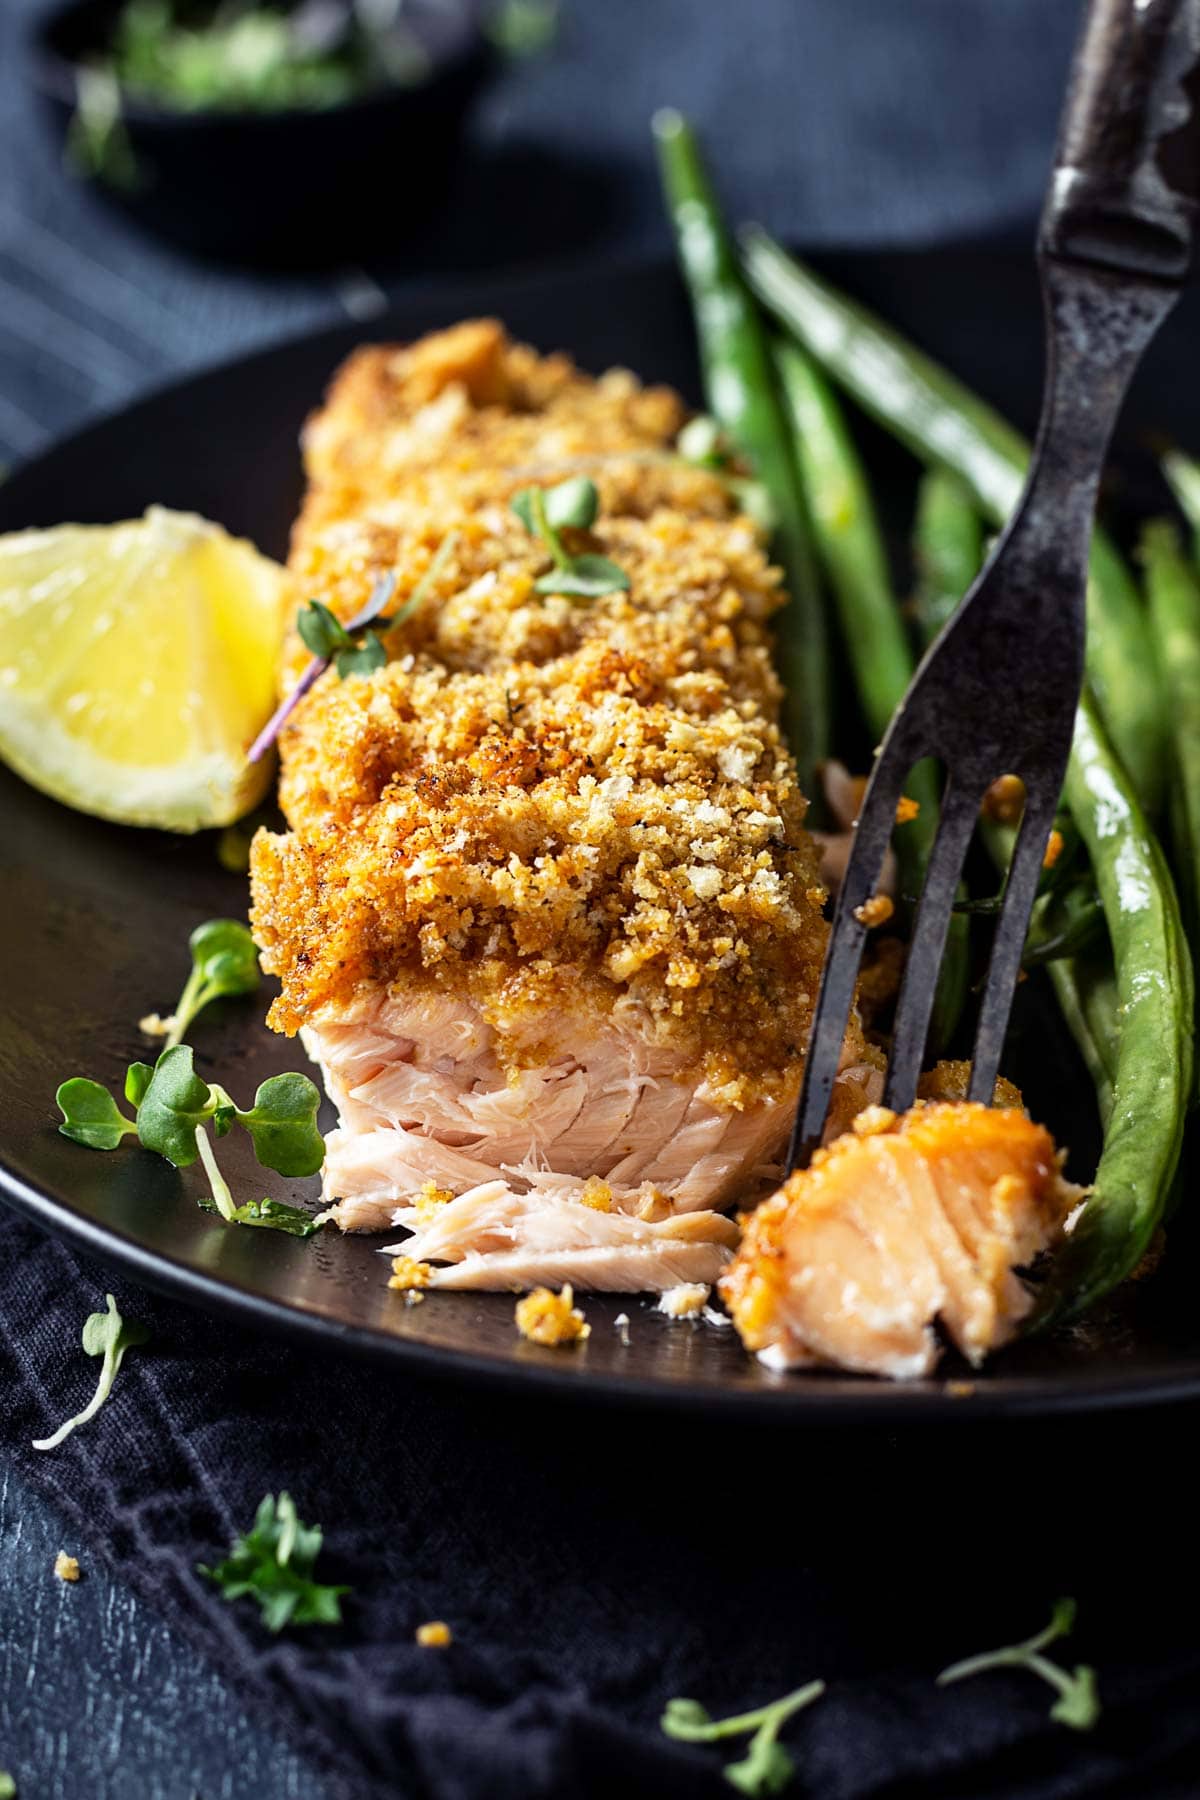 A close up of crusted salmon with a bite removed to show its flakiness.